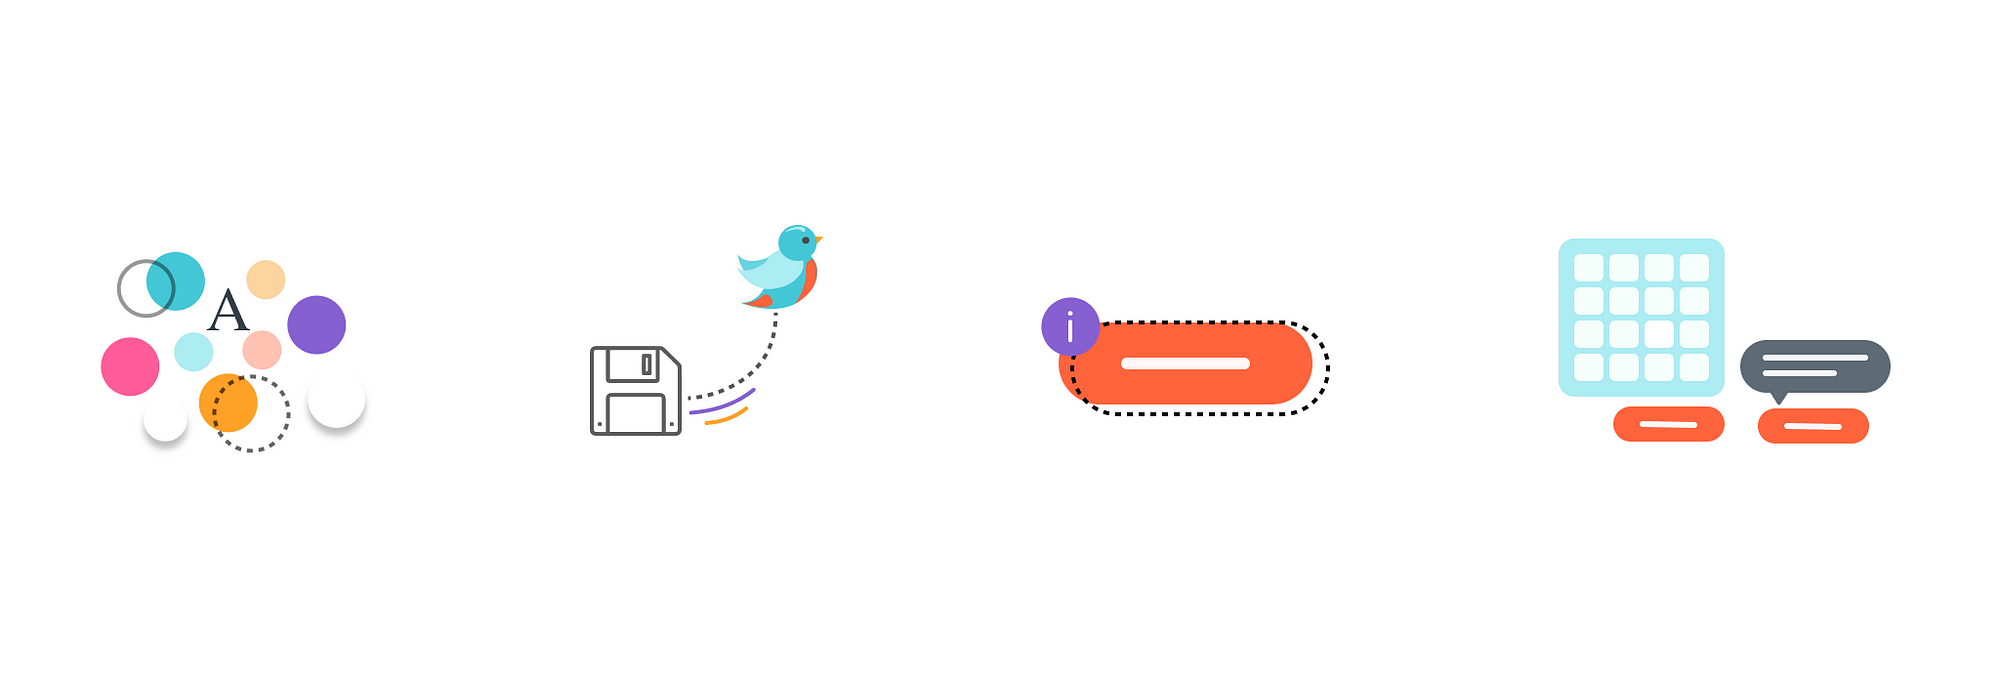 Animation/Motion Design Tokens. For complex Design Systems